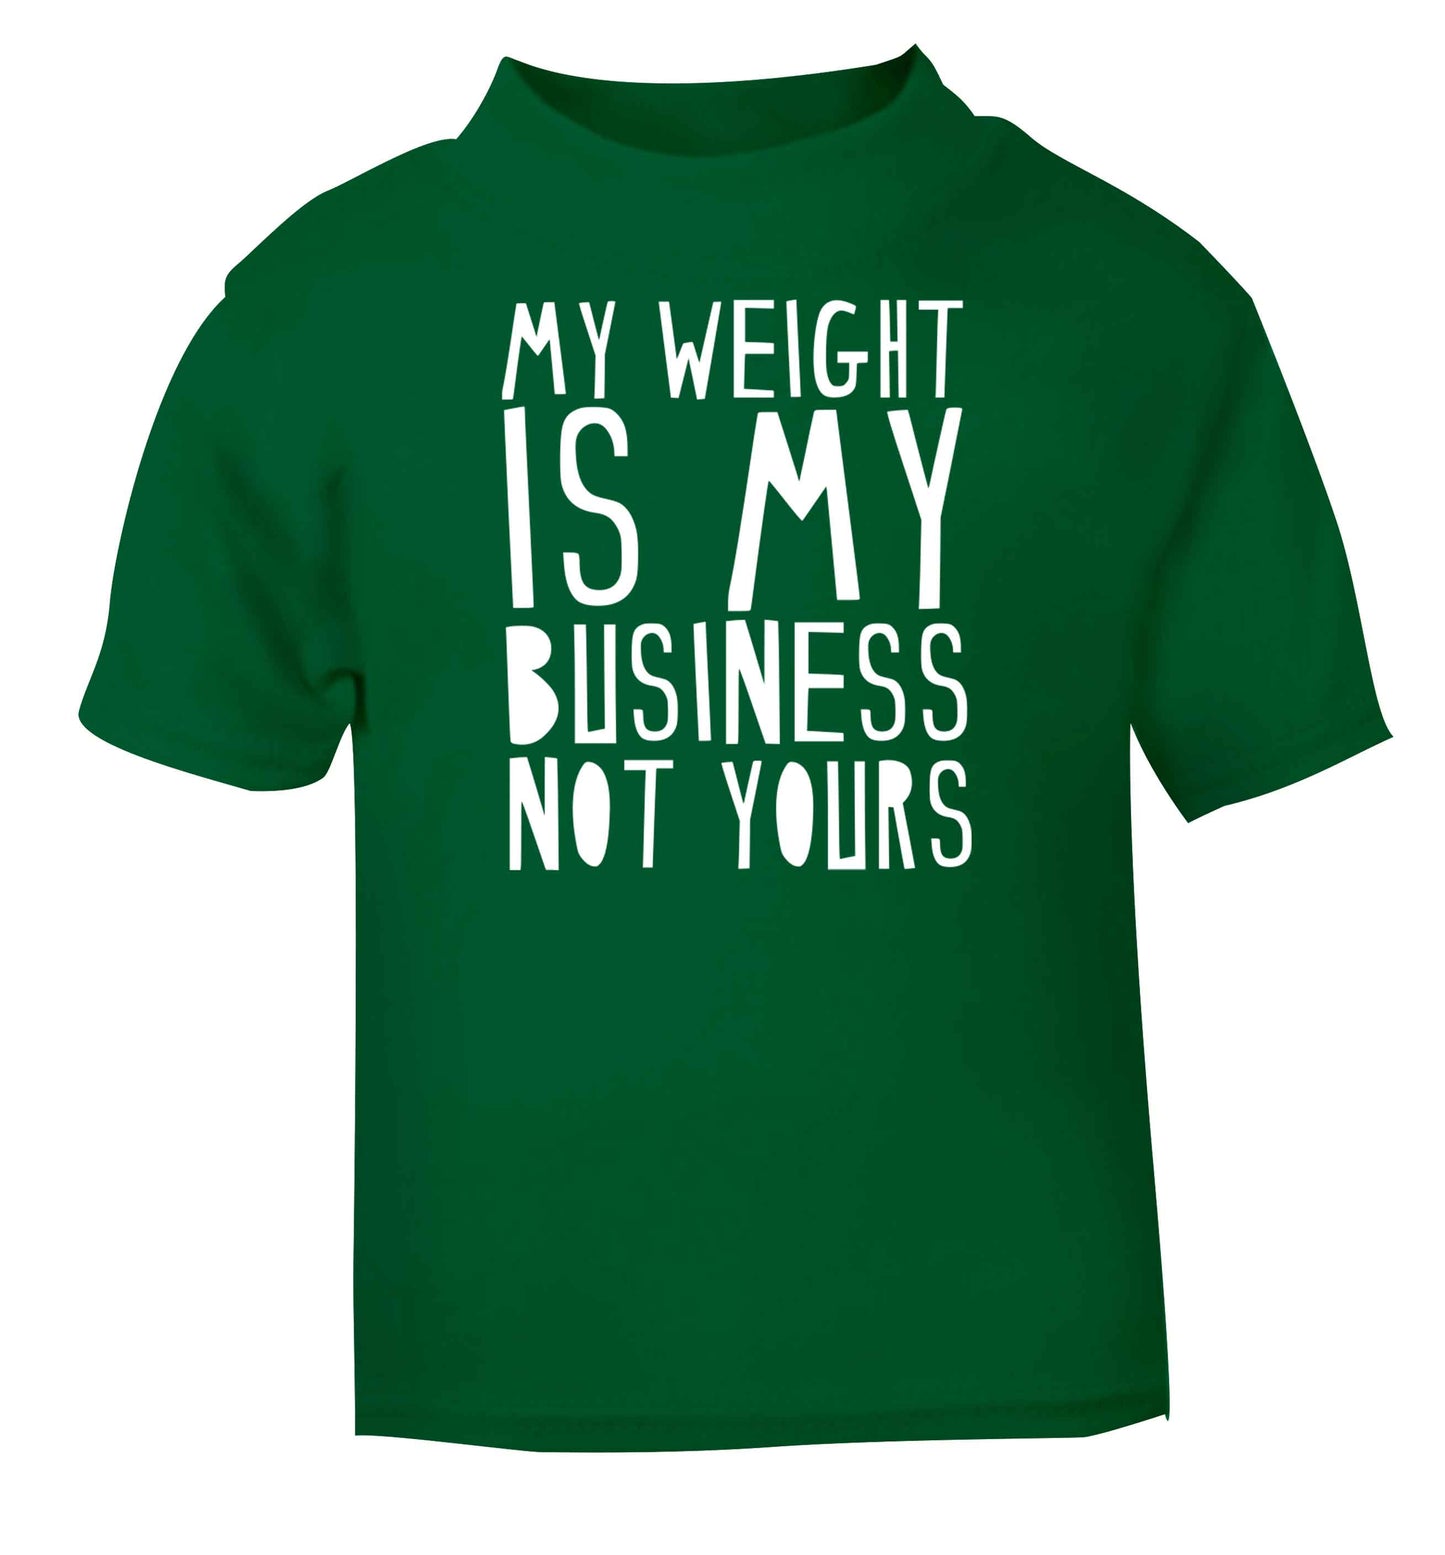 My weight is my business not yours green baby toddler Tshirt 2 Years